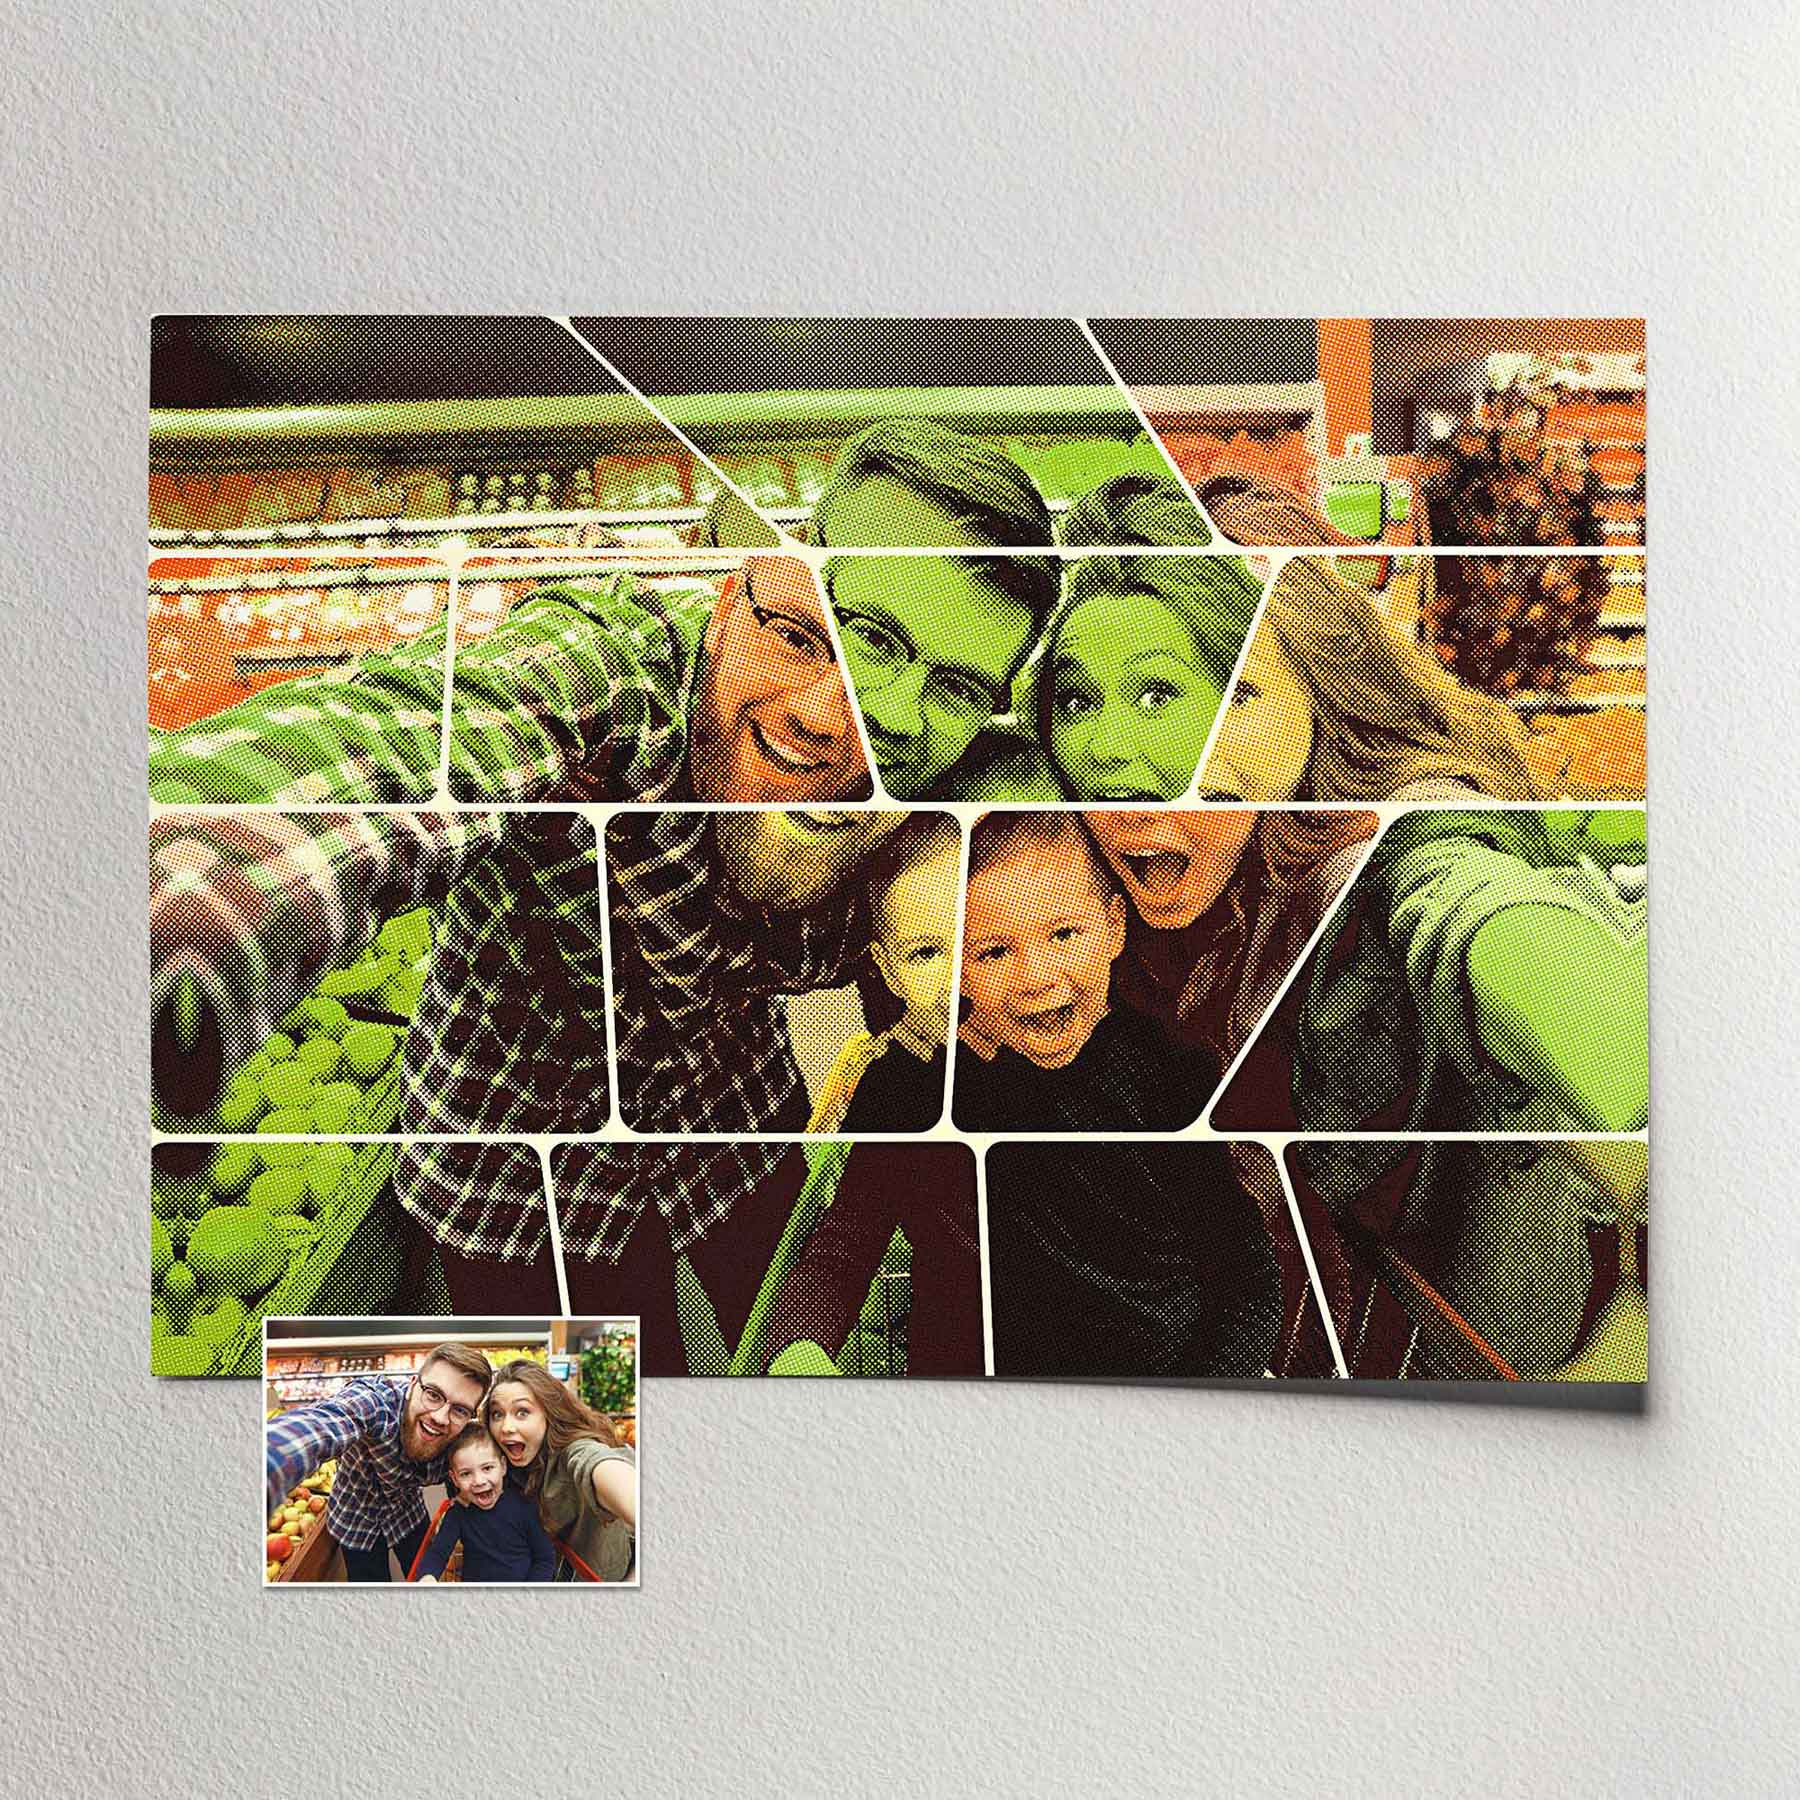 Ignite a sense of nostalgia with our Personalised Vintage Comics Print. The retro comics filter, with its orange and green hues, brings an old school style to your photos, evoking a vibrant and ultra cool energy